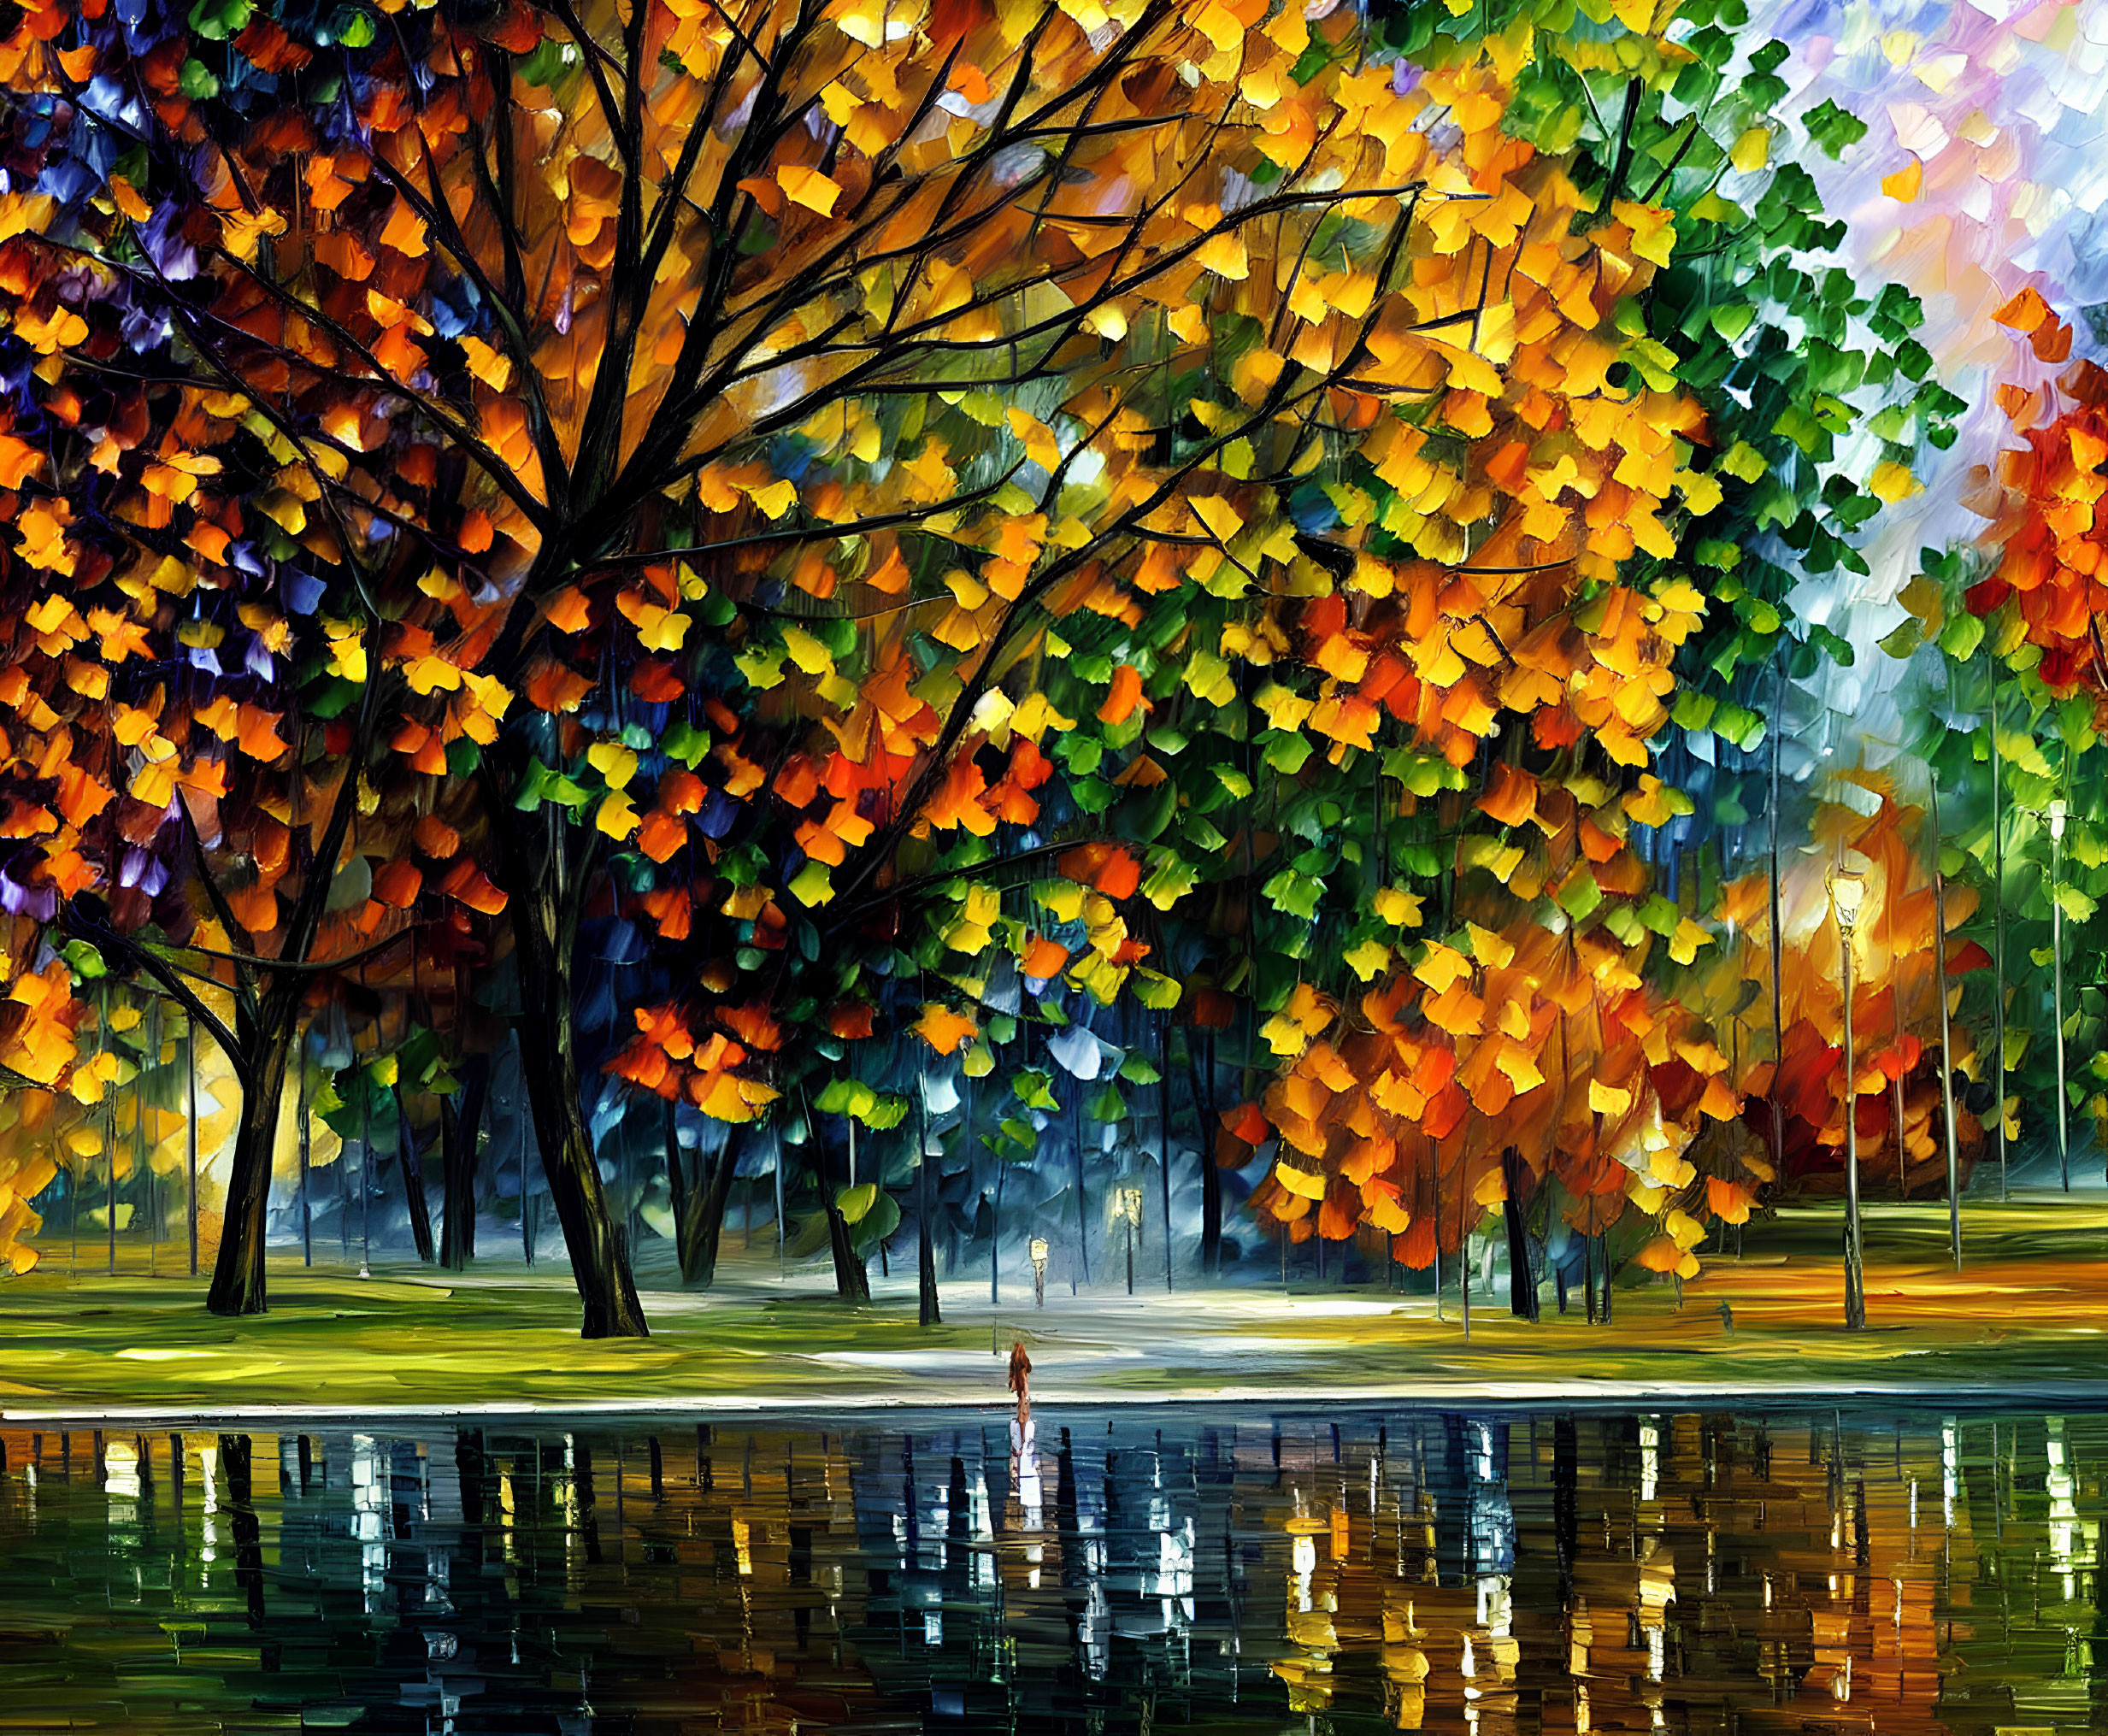 Autumn park painting with colorful trees, serene lake, figure, and lamp posts